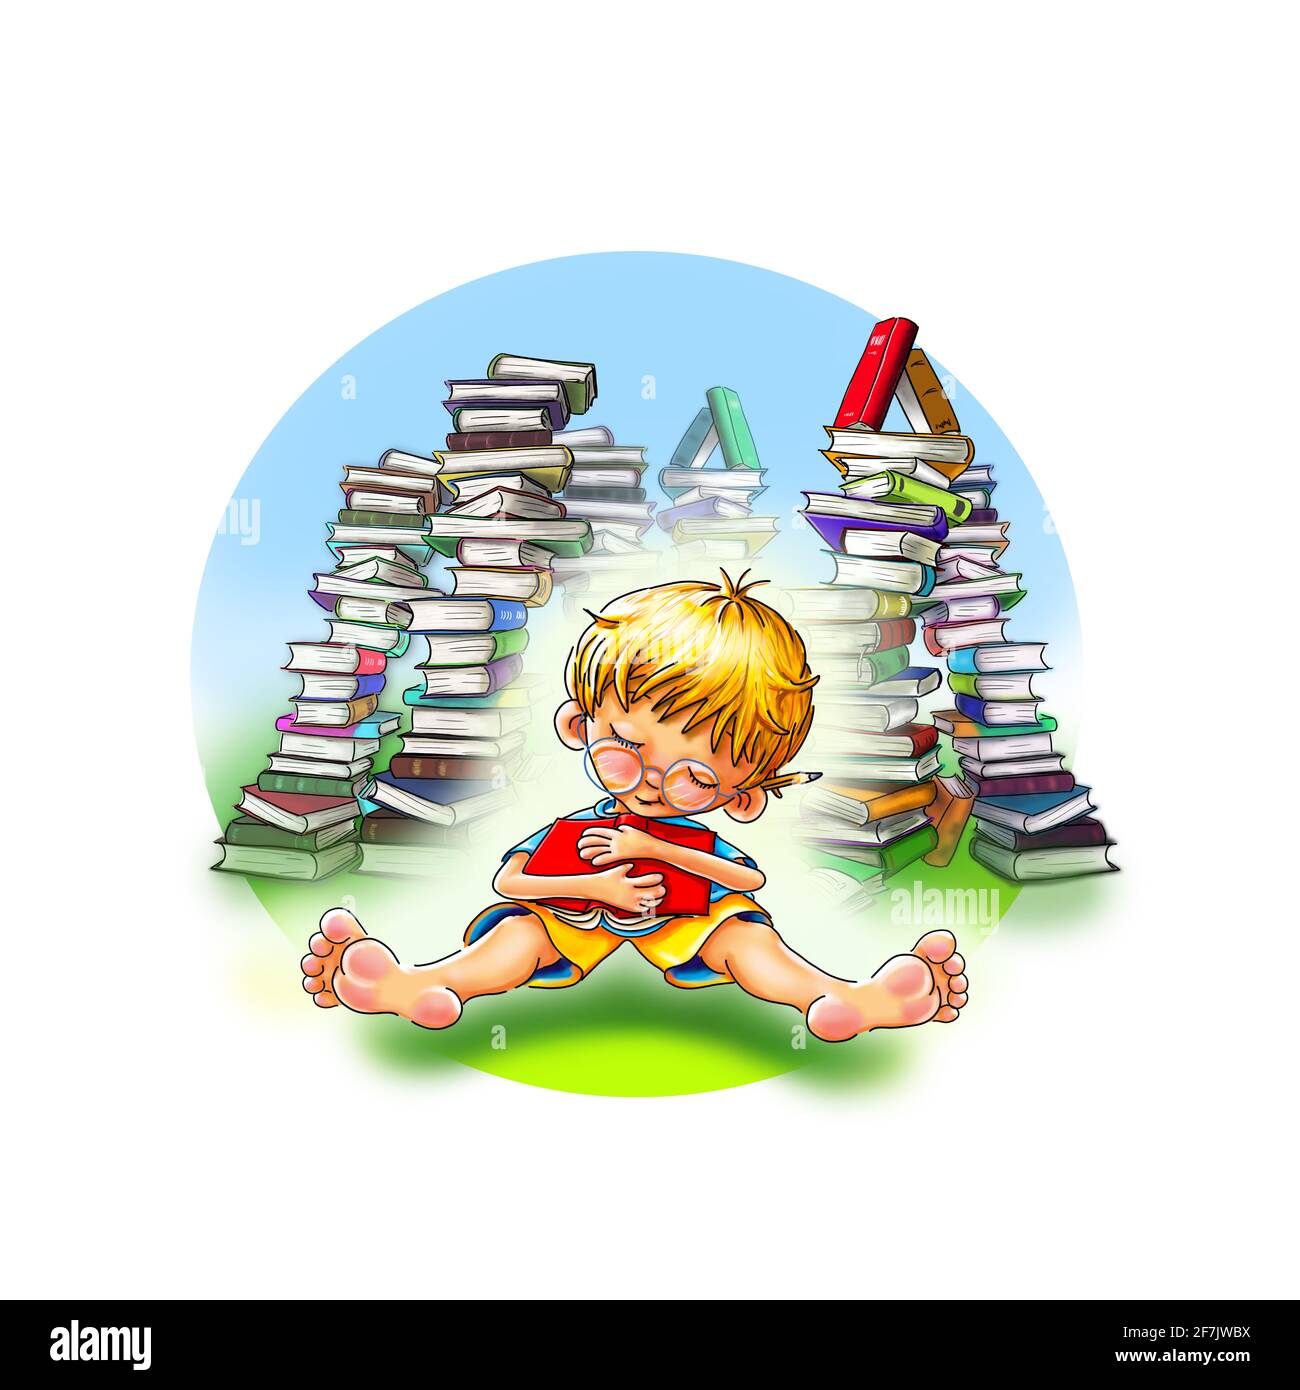 Little boy with glasses sits barefoot, legs stretched out, with a book he is hugging, asleep in front of stacks of books. He's clutching his book Stock Photo